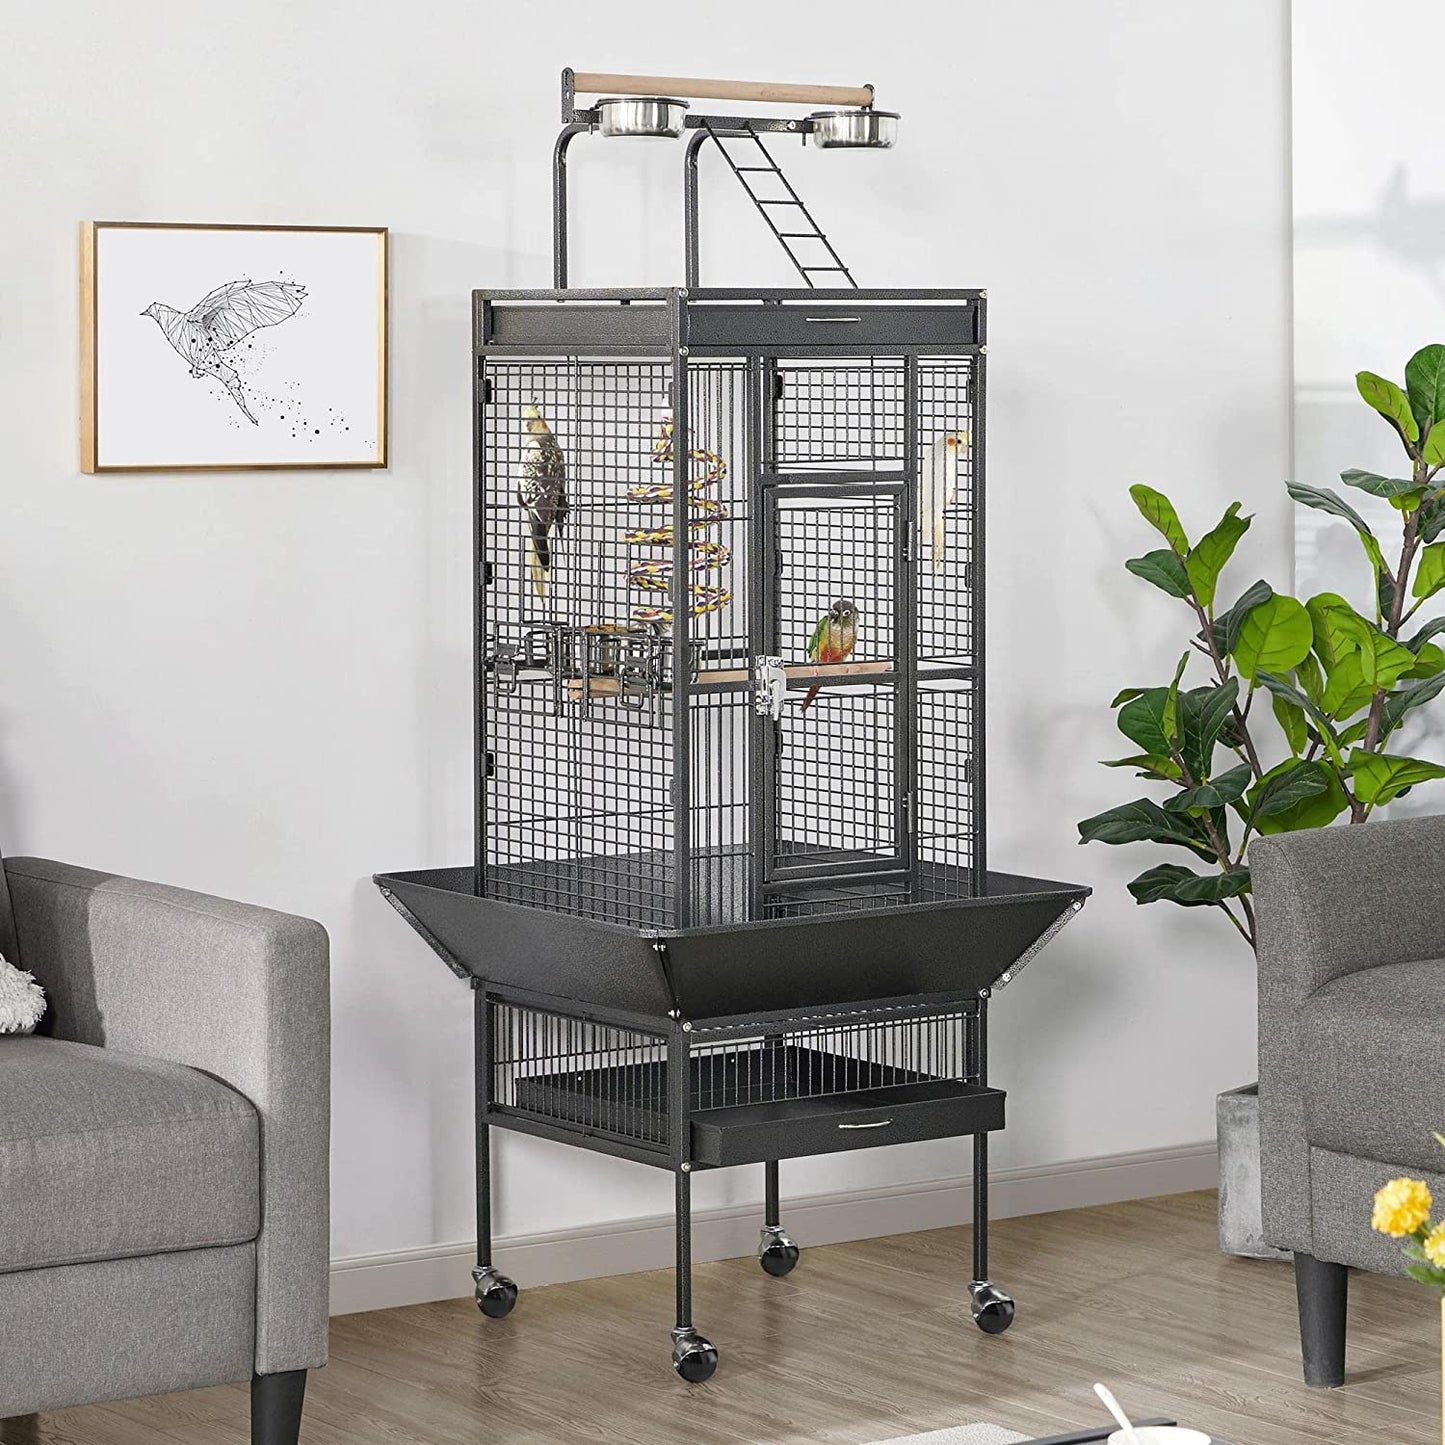 61-Inch Playtop Wrought Iron Large Parrot Bird Cages with Rolling Stand for Cockatiels Amazon Parrot Quaker Conure Parakeet Lovebird Finch Canary Small Medium Parrot Cage Birdcage, Black